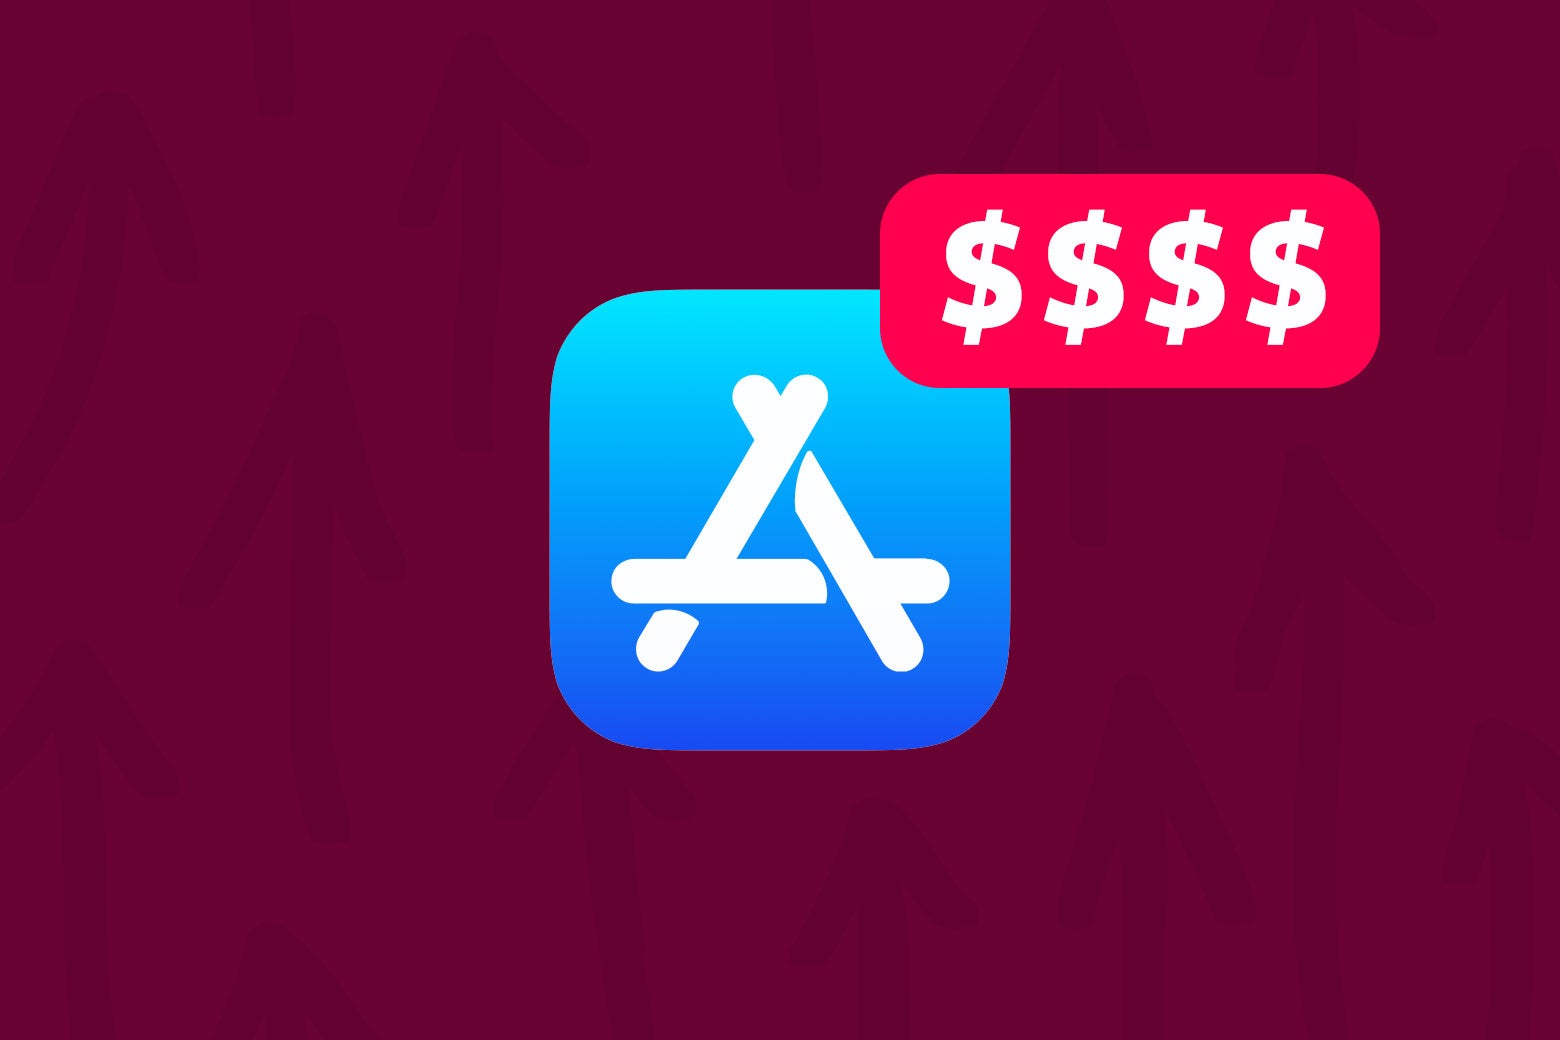 The Apple App Store icon with a red notification bubble filled with four dollar signs.